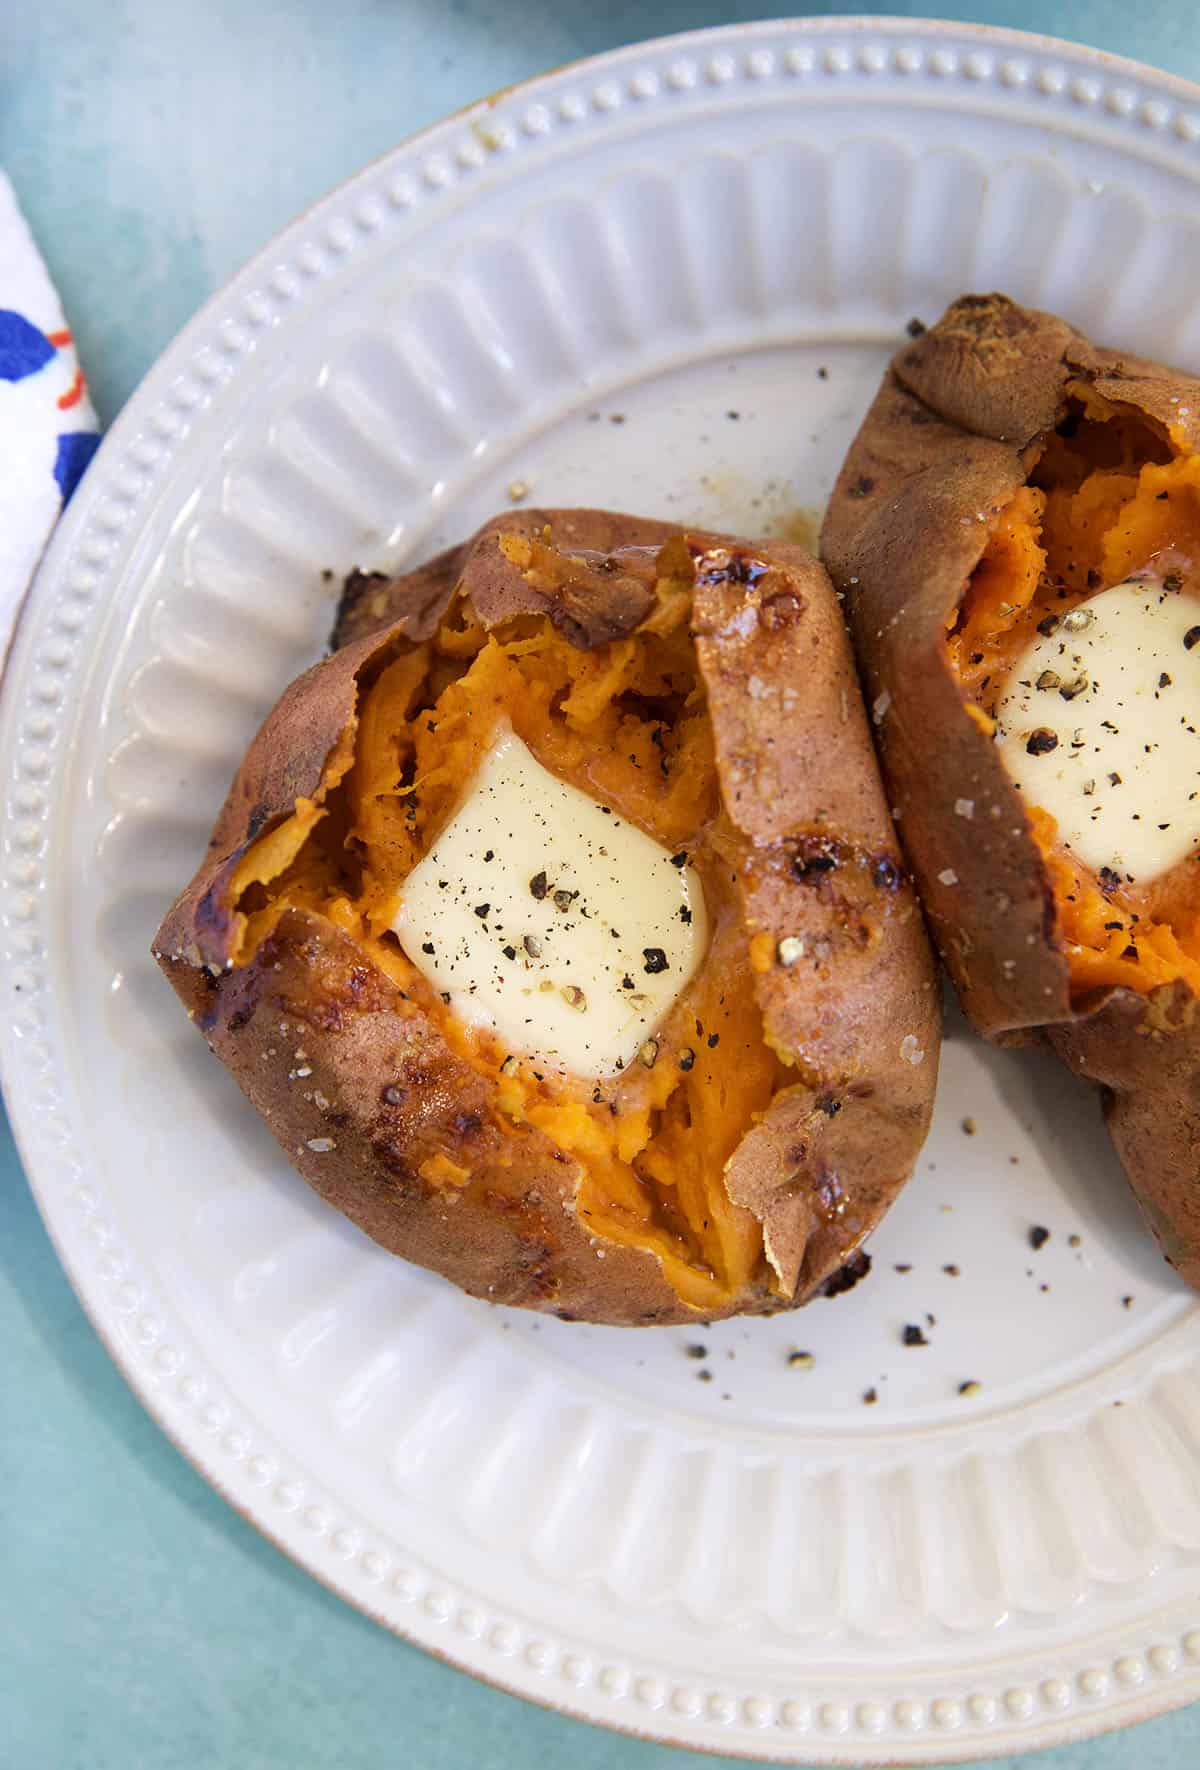 Two baked sweet potatoes are topped with butter and black pepper on a white plate.